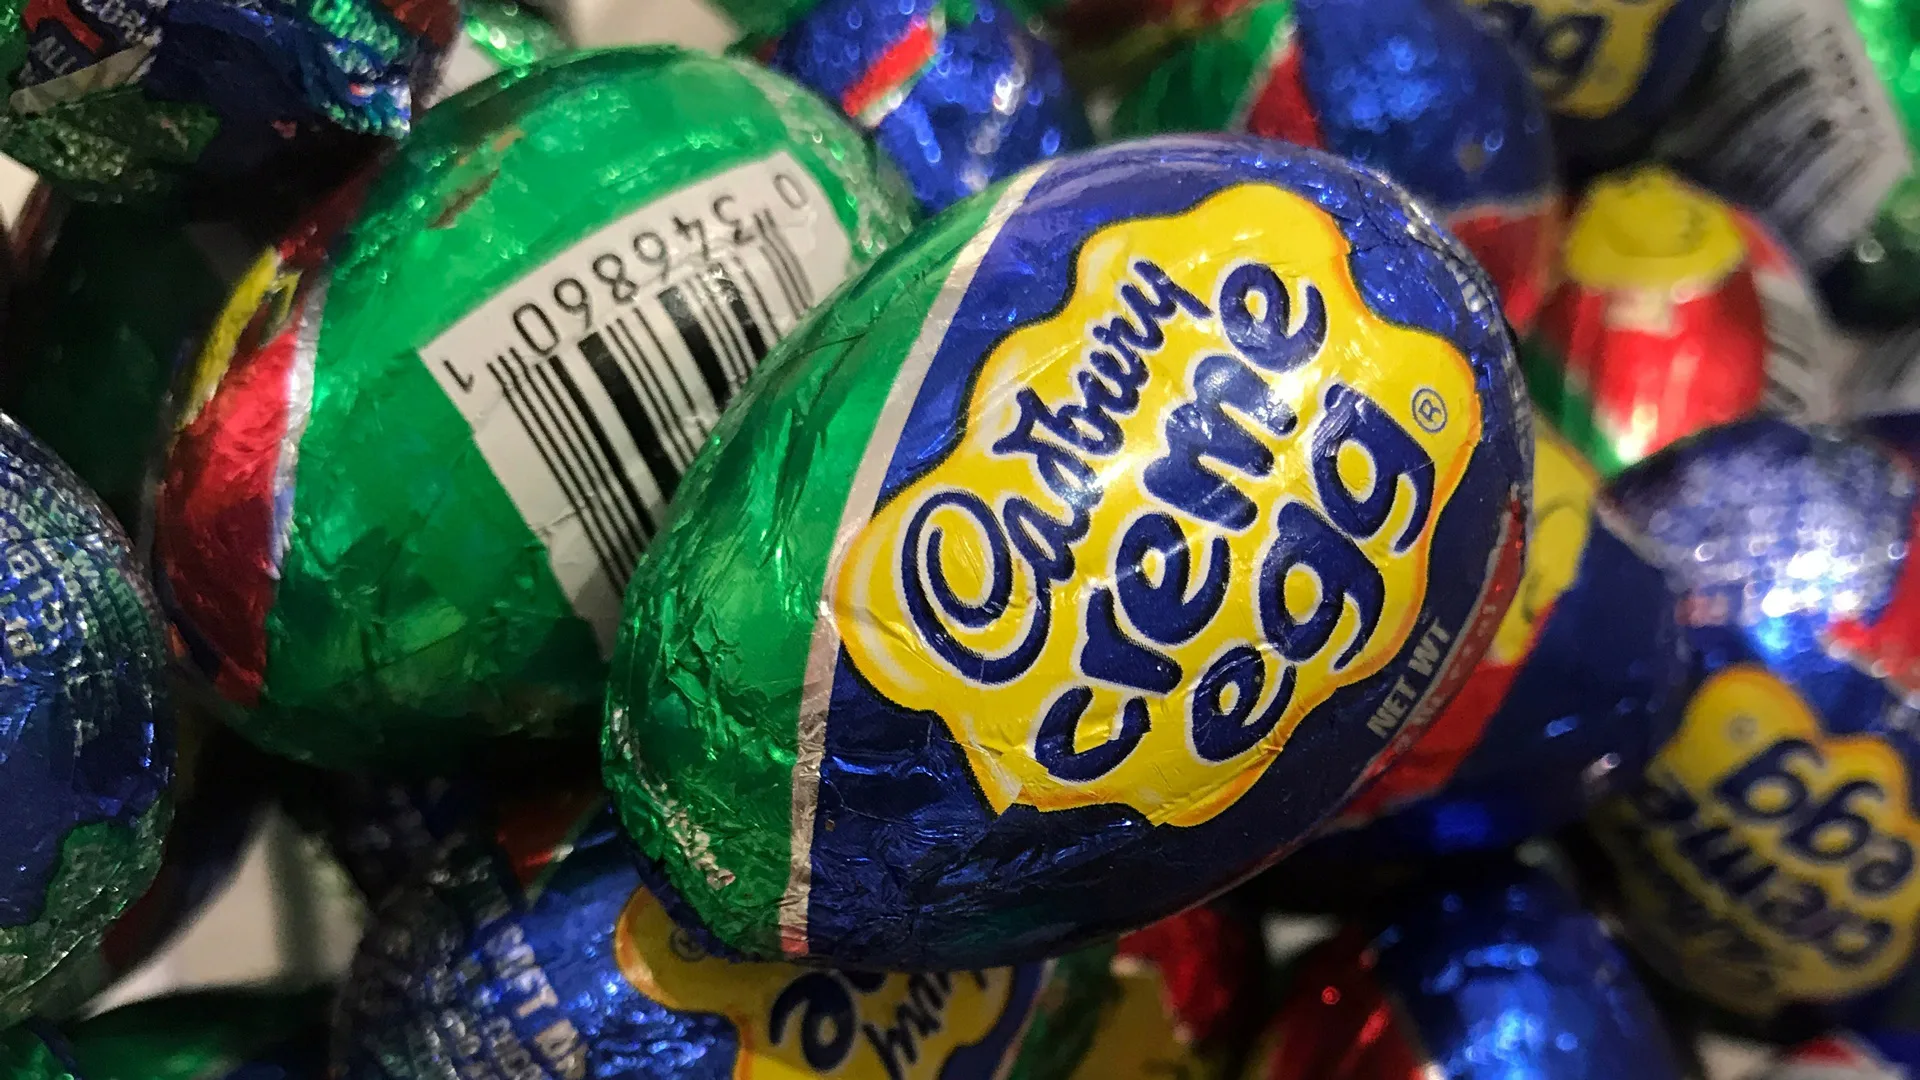 A close-up photograph of a Cadbury creme egg in it's foil wrapping